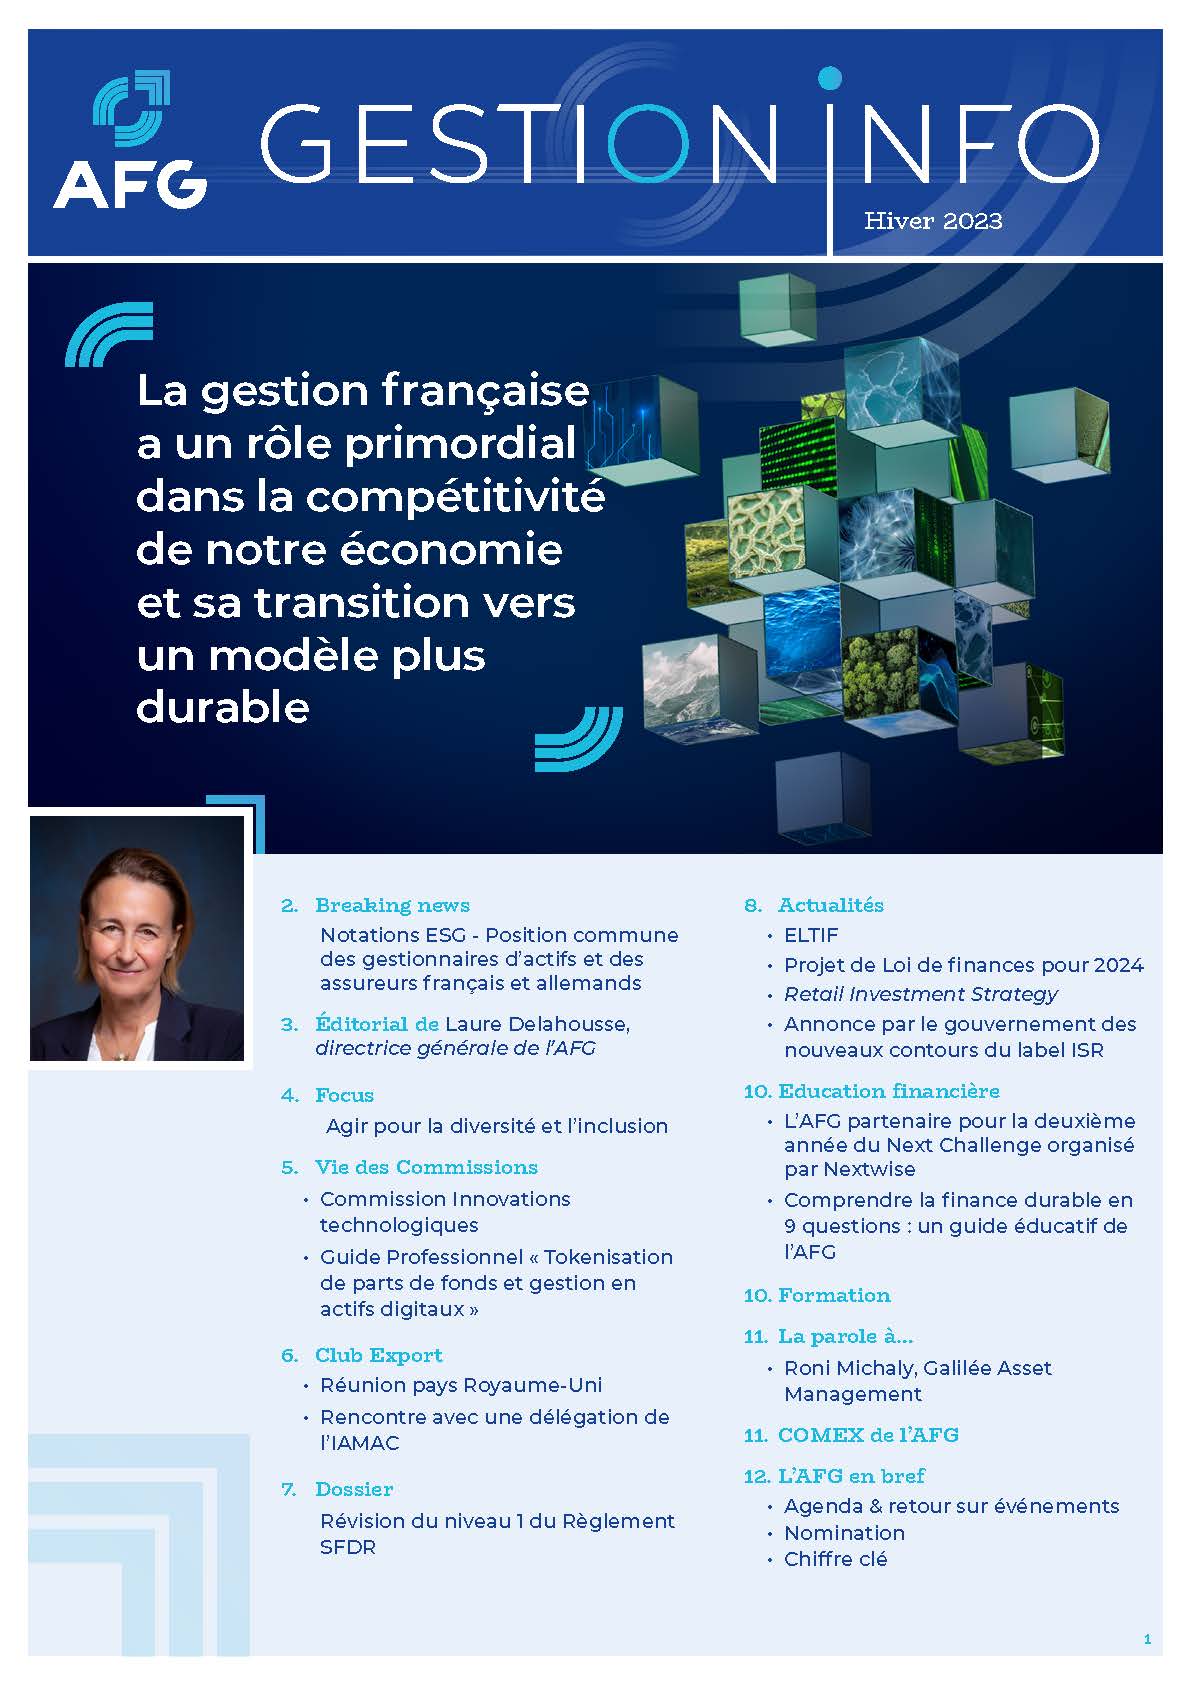 gestion info hiver 2023